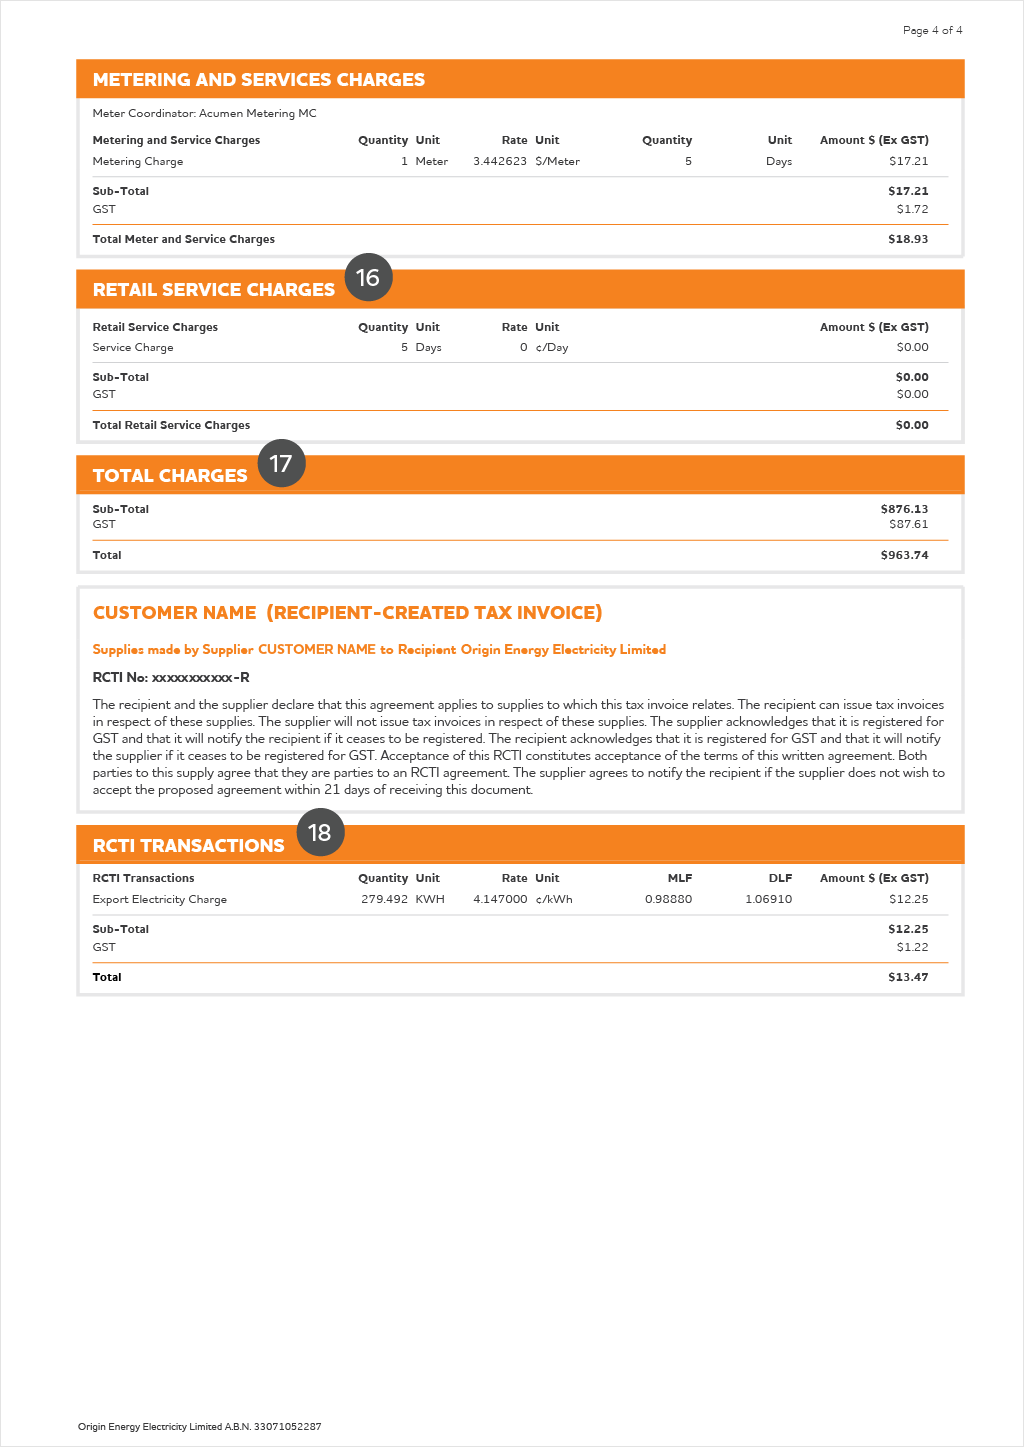 Page 4 of Origin commercial electricity bill